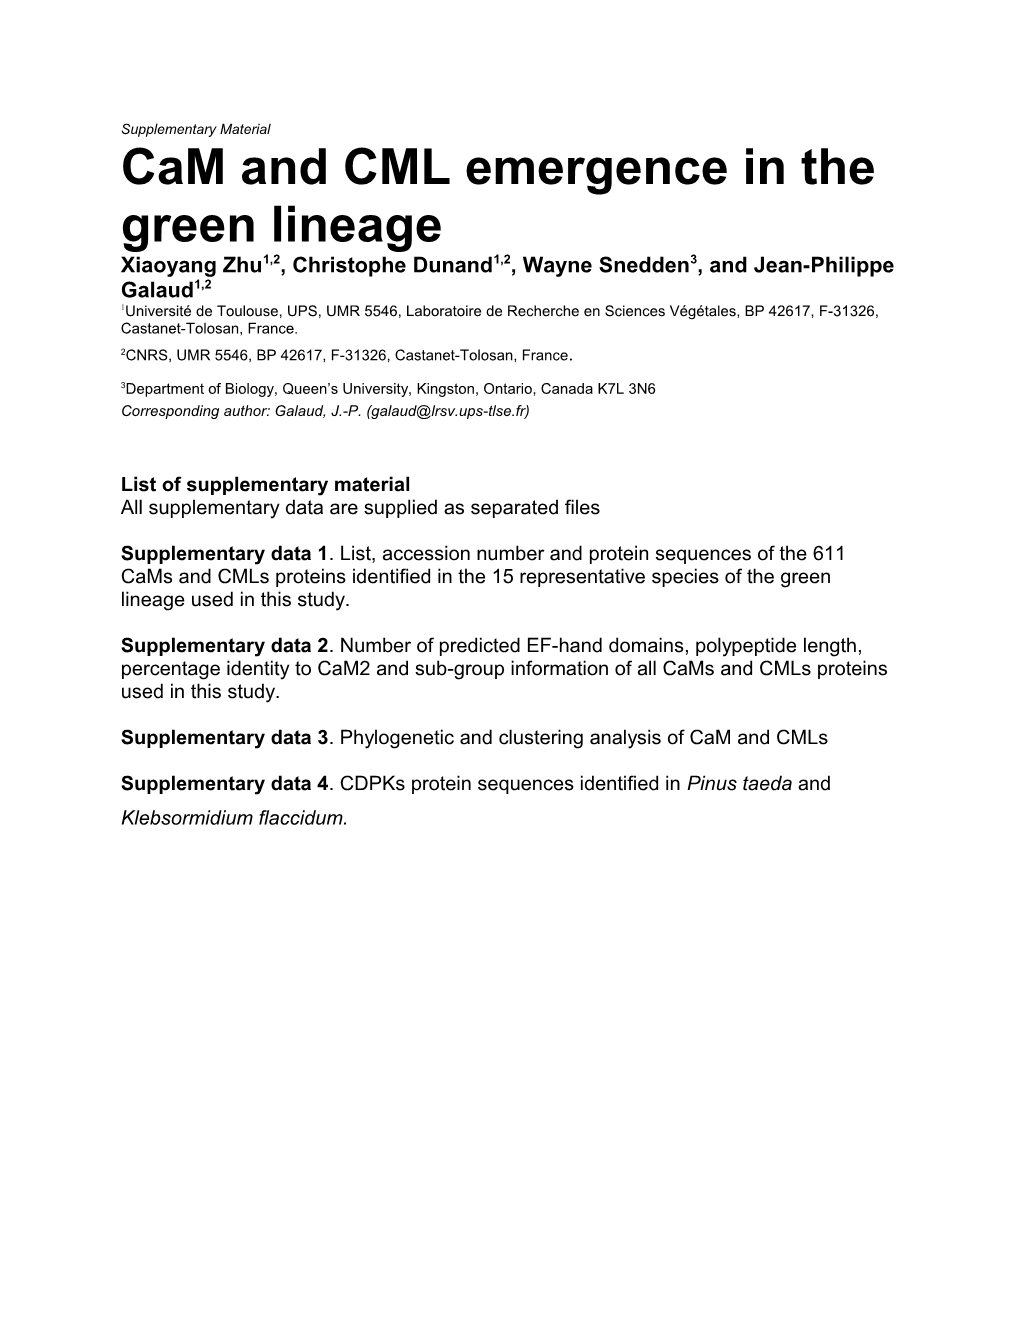 Cam and CML Emergence in the Green Lineage